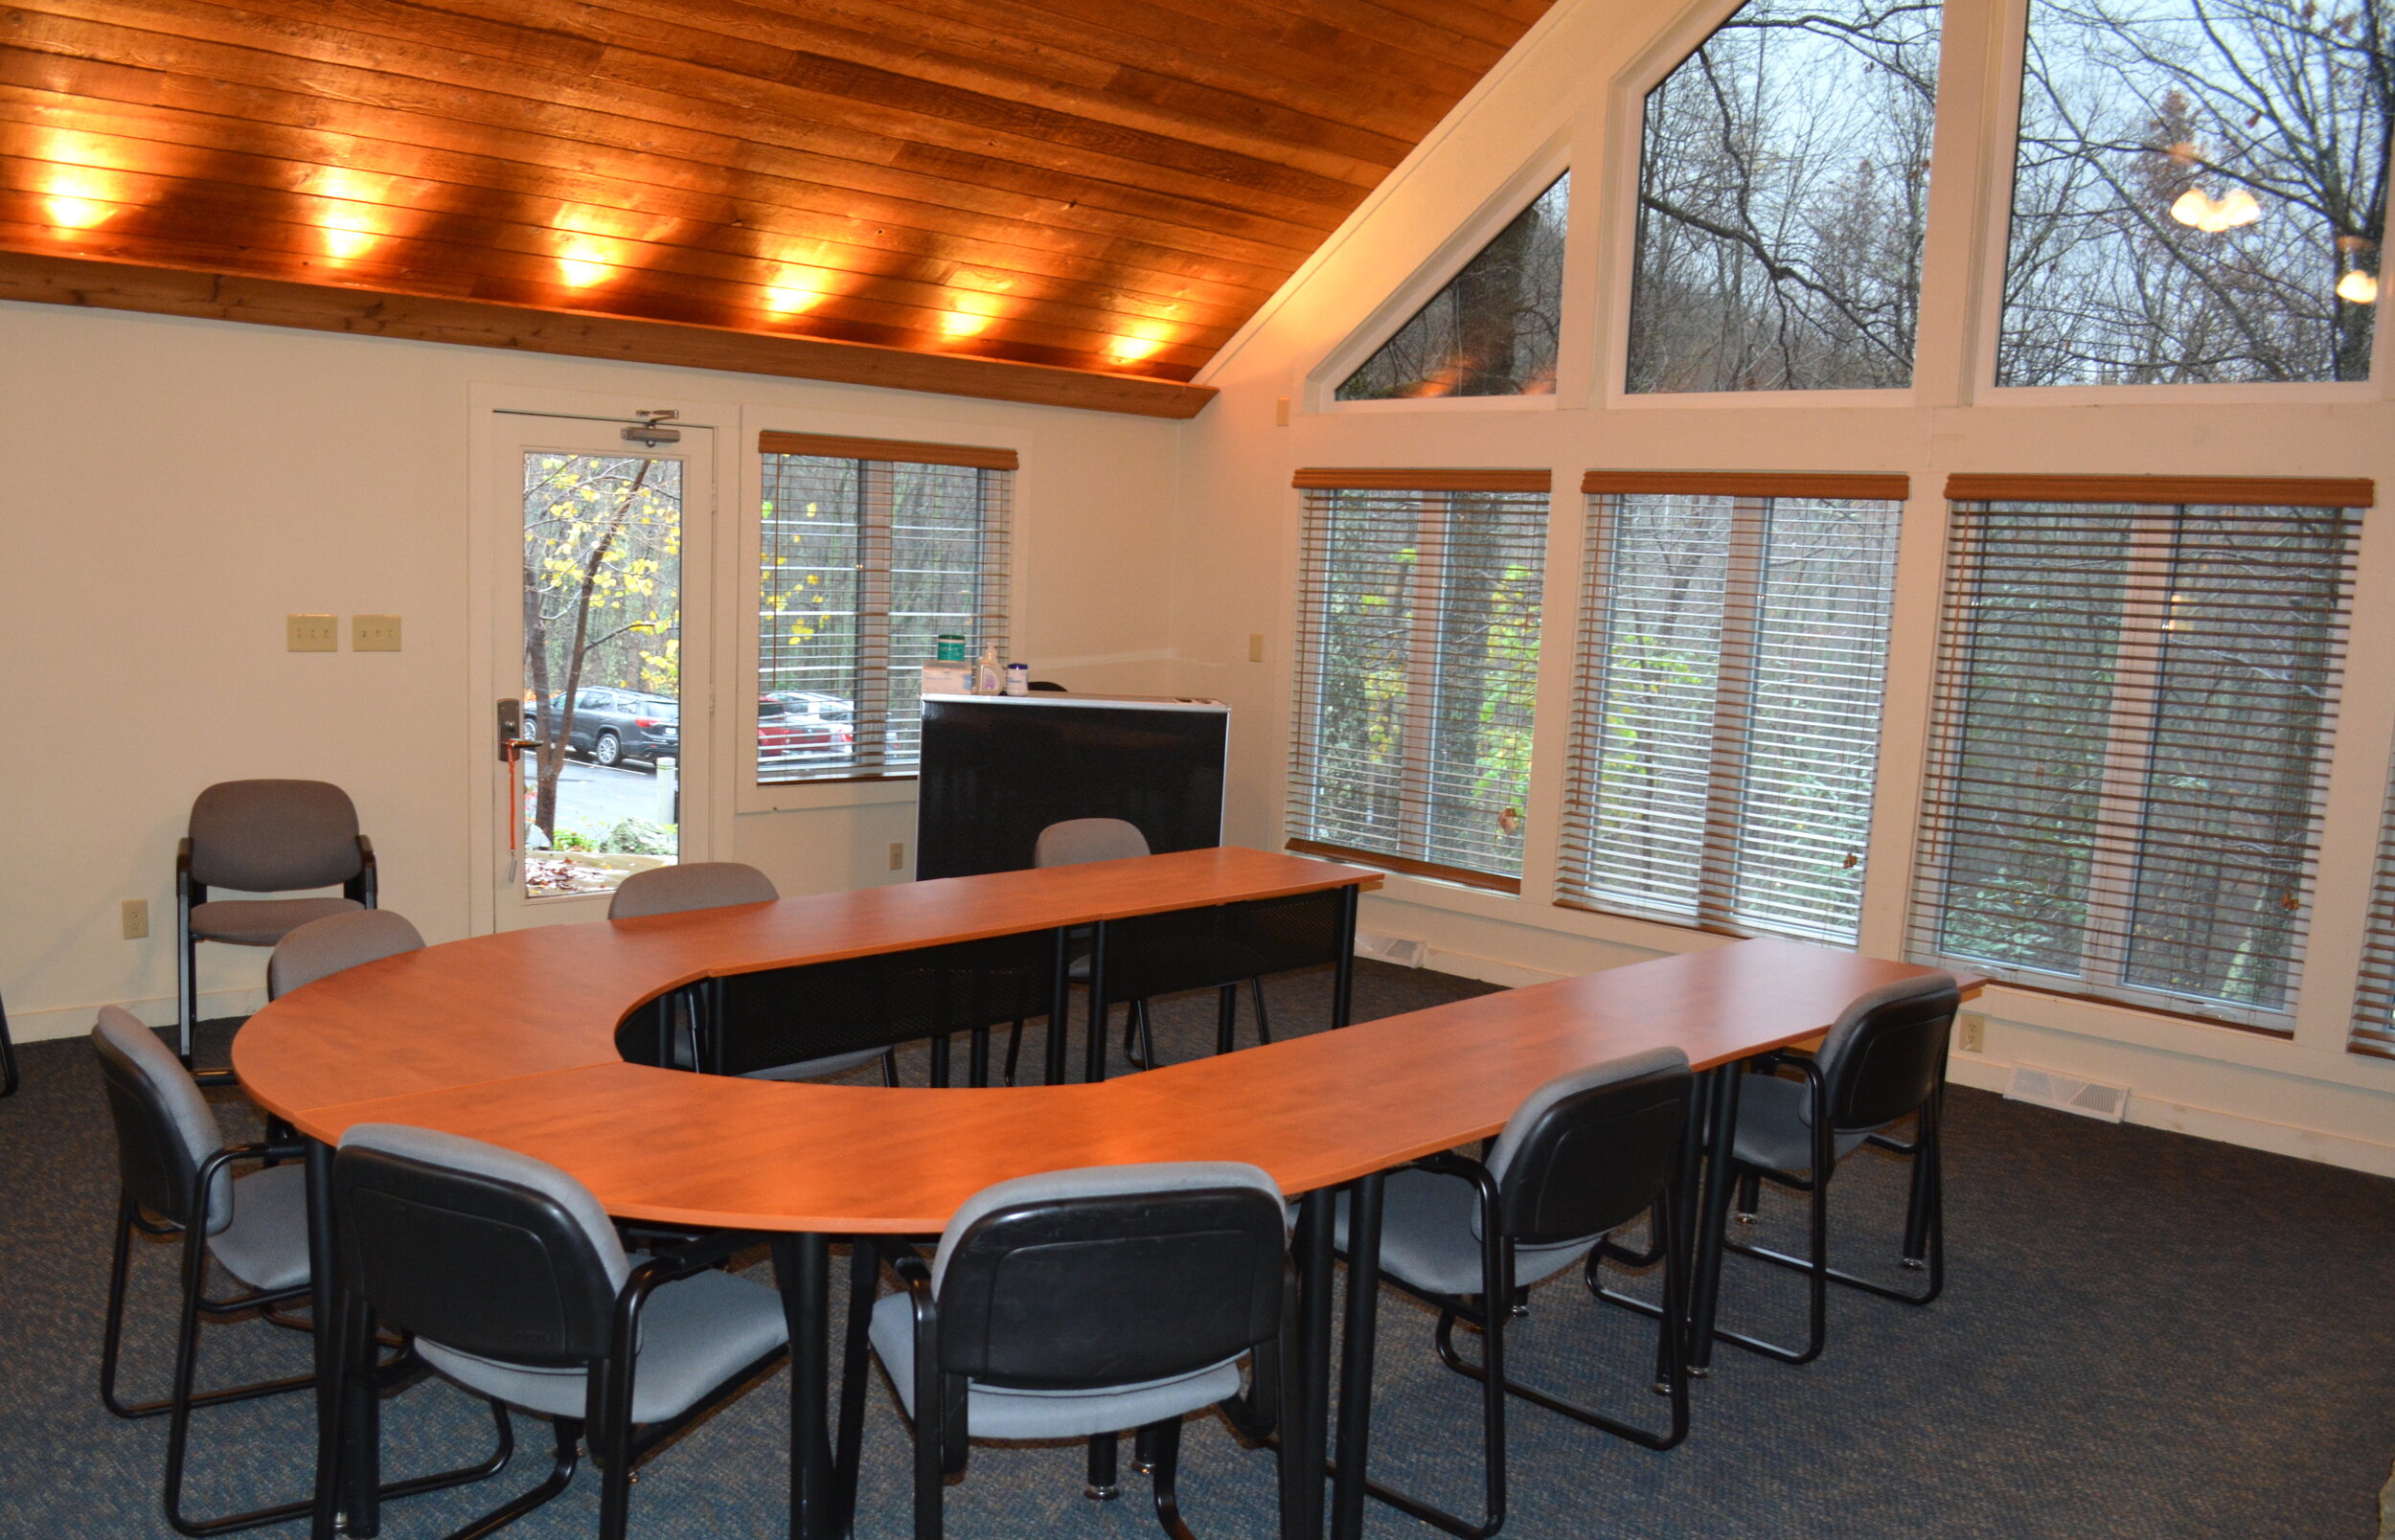   The Faulkner Room can be used after WPOA office hours thanks to a separate entry door.  